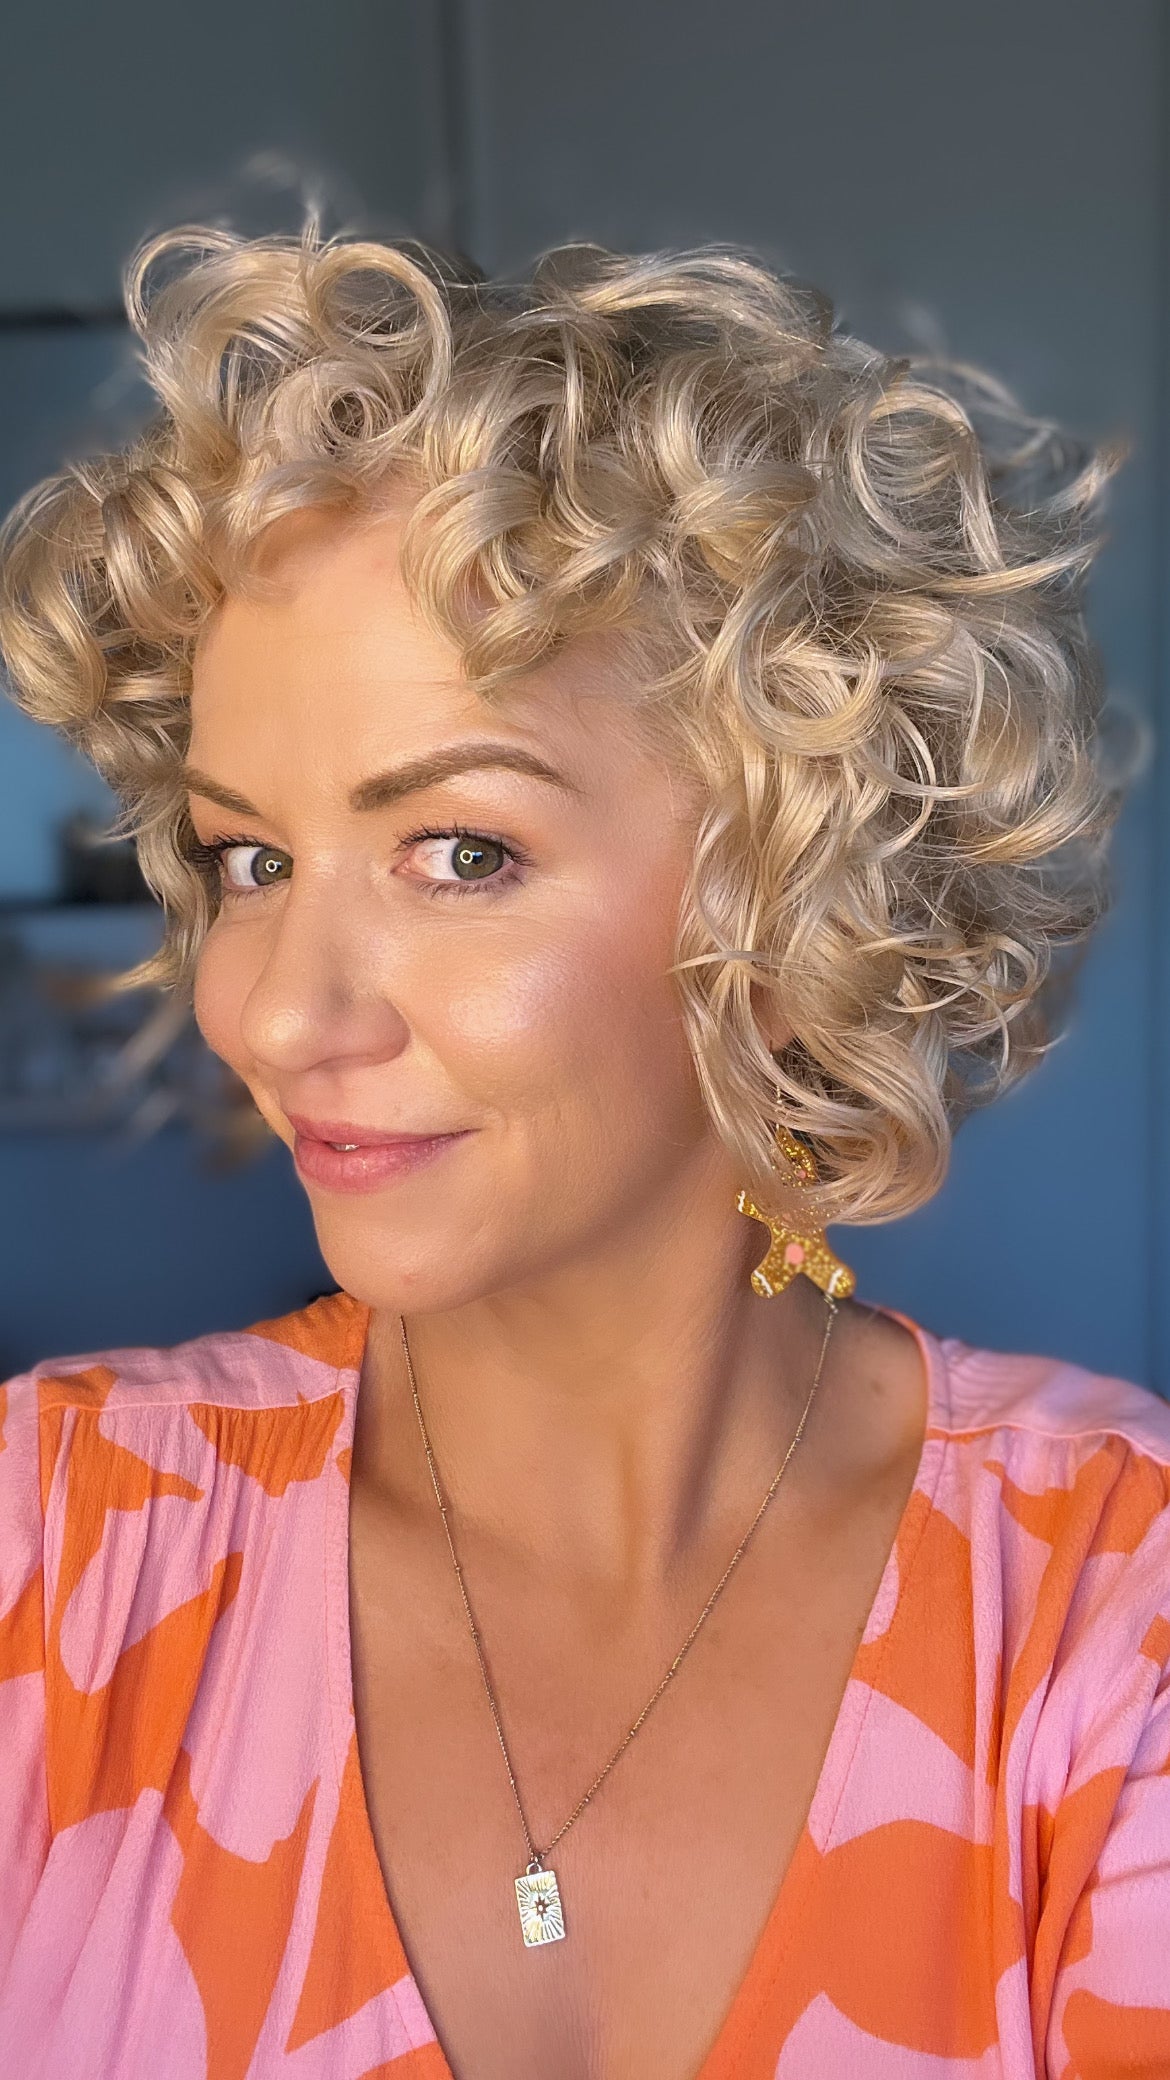 Load video: How to style naturally curly hair